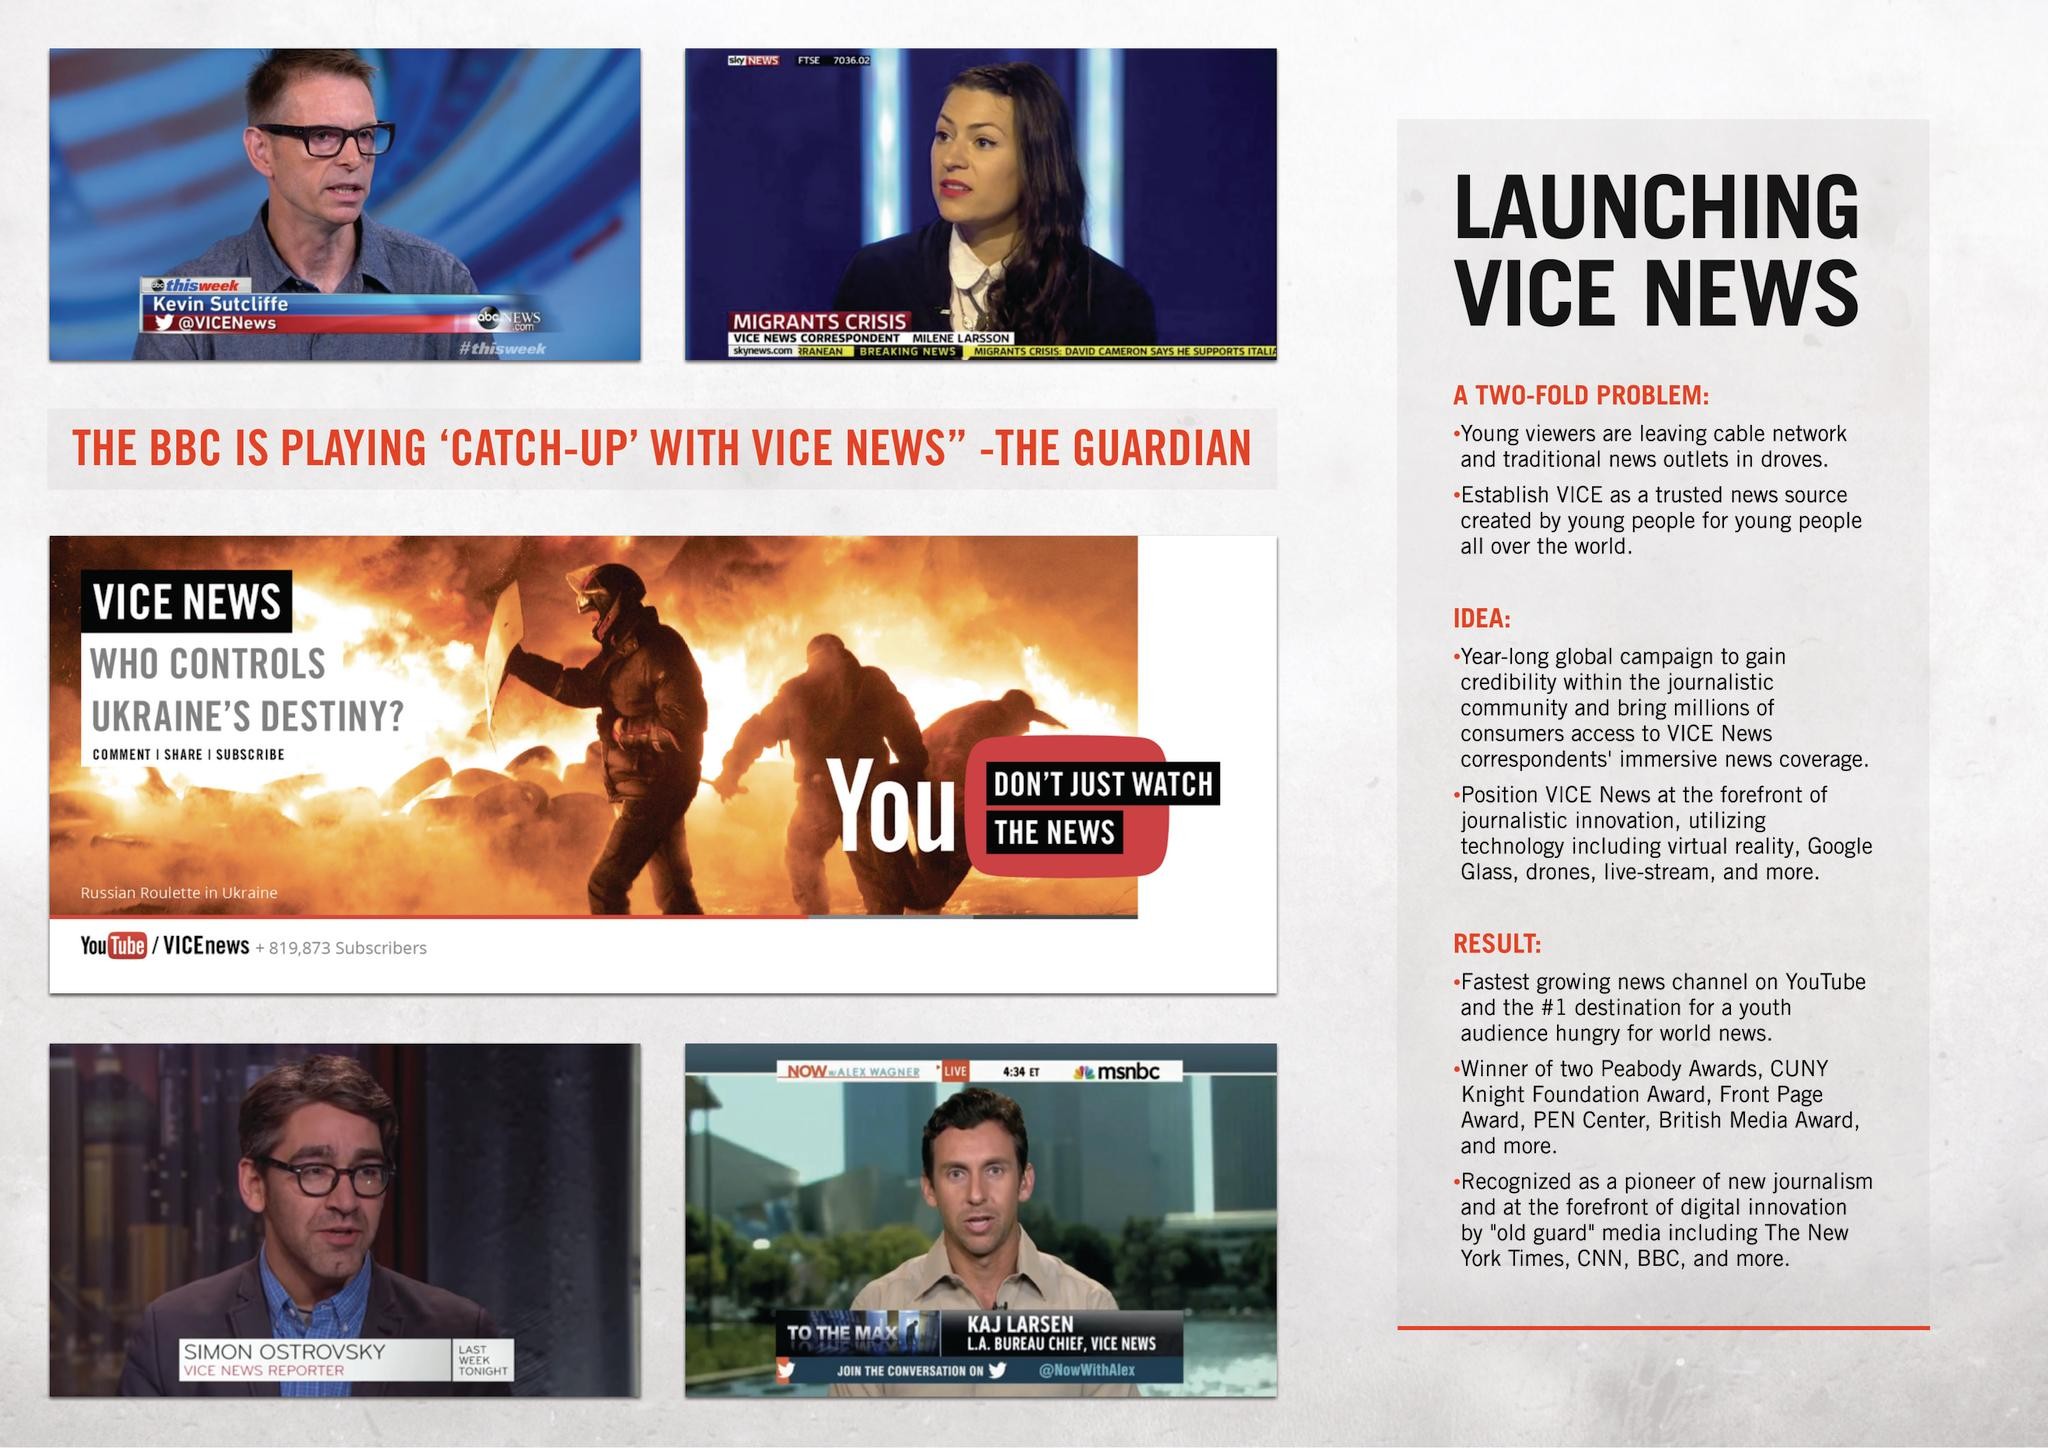 THE LAUNCH OF VICE NEWS